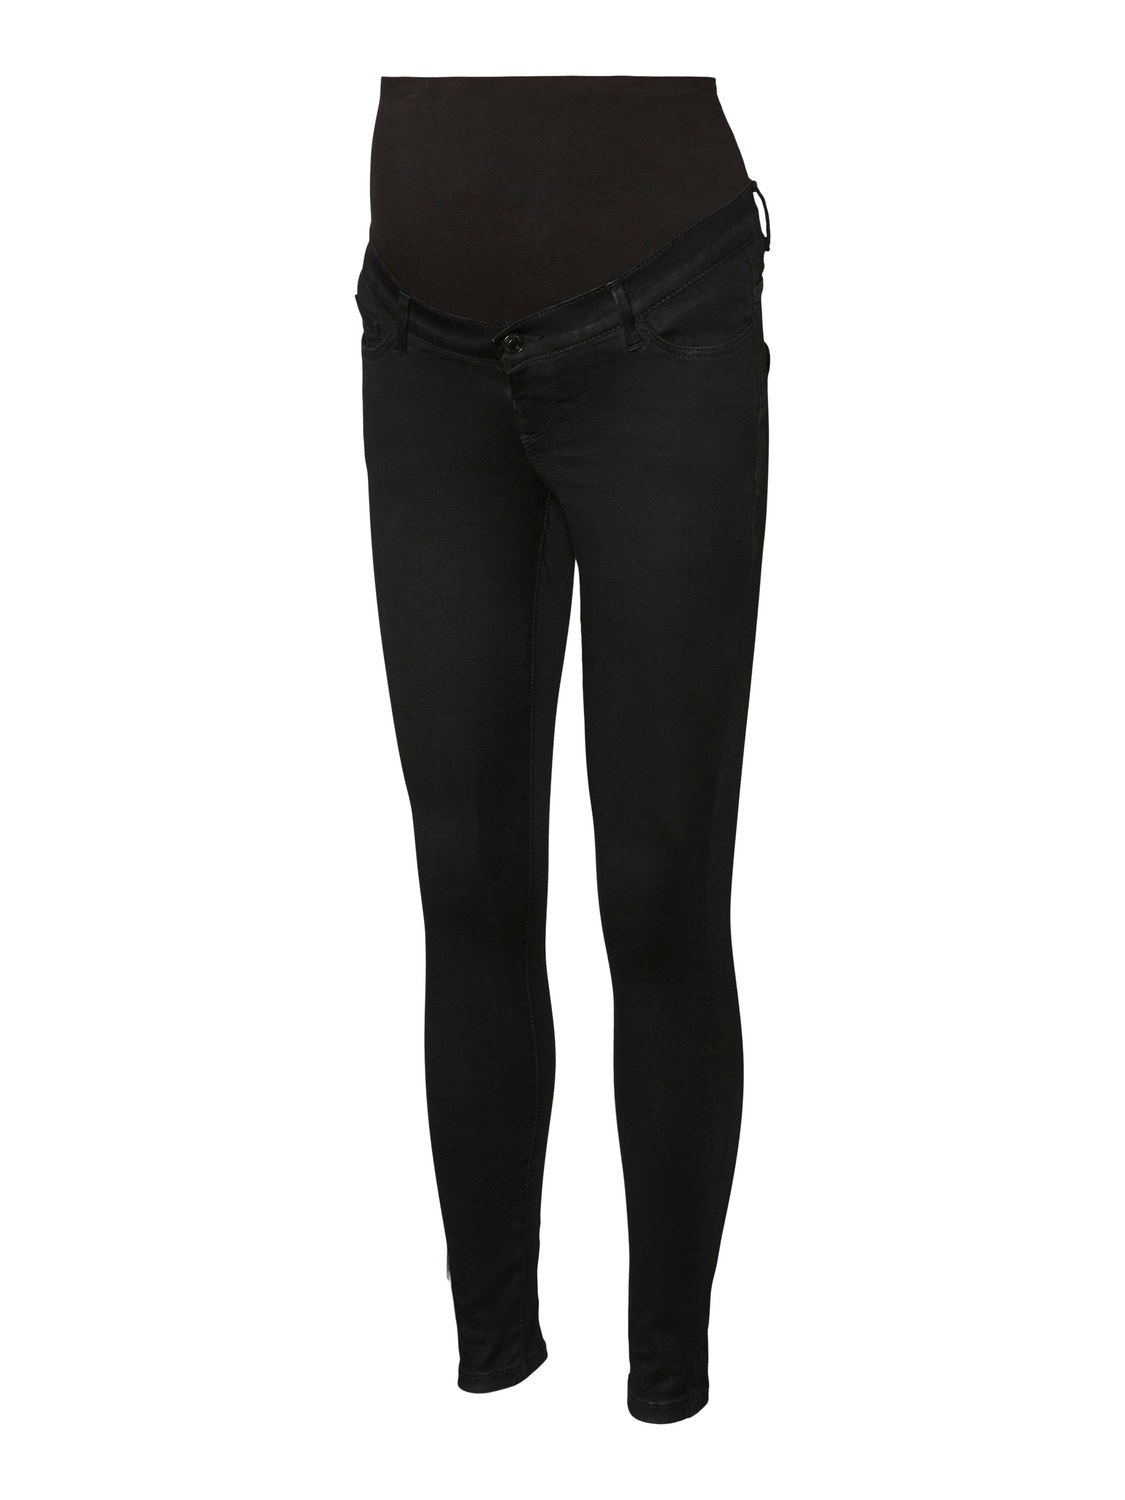 MAMA.LICIOUS Jeans Skinny Fit -Black - 20015413